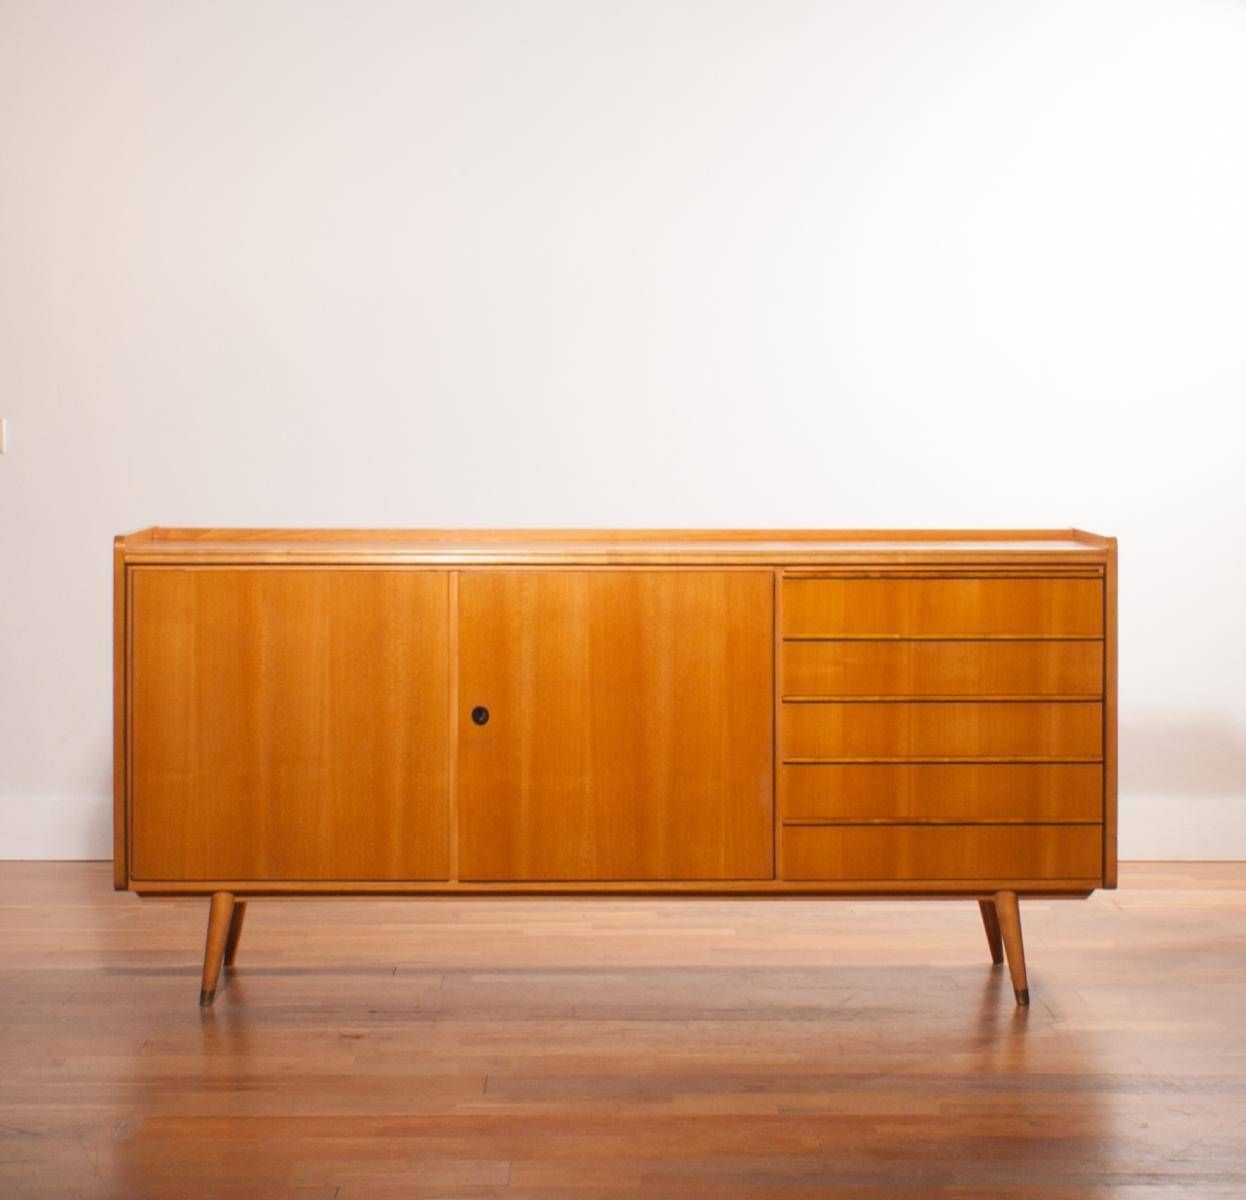 Beech Sideboard, 1950s For Sale At Pamono Regarding Beech Sideboards (View 3 of 30)